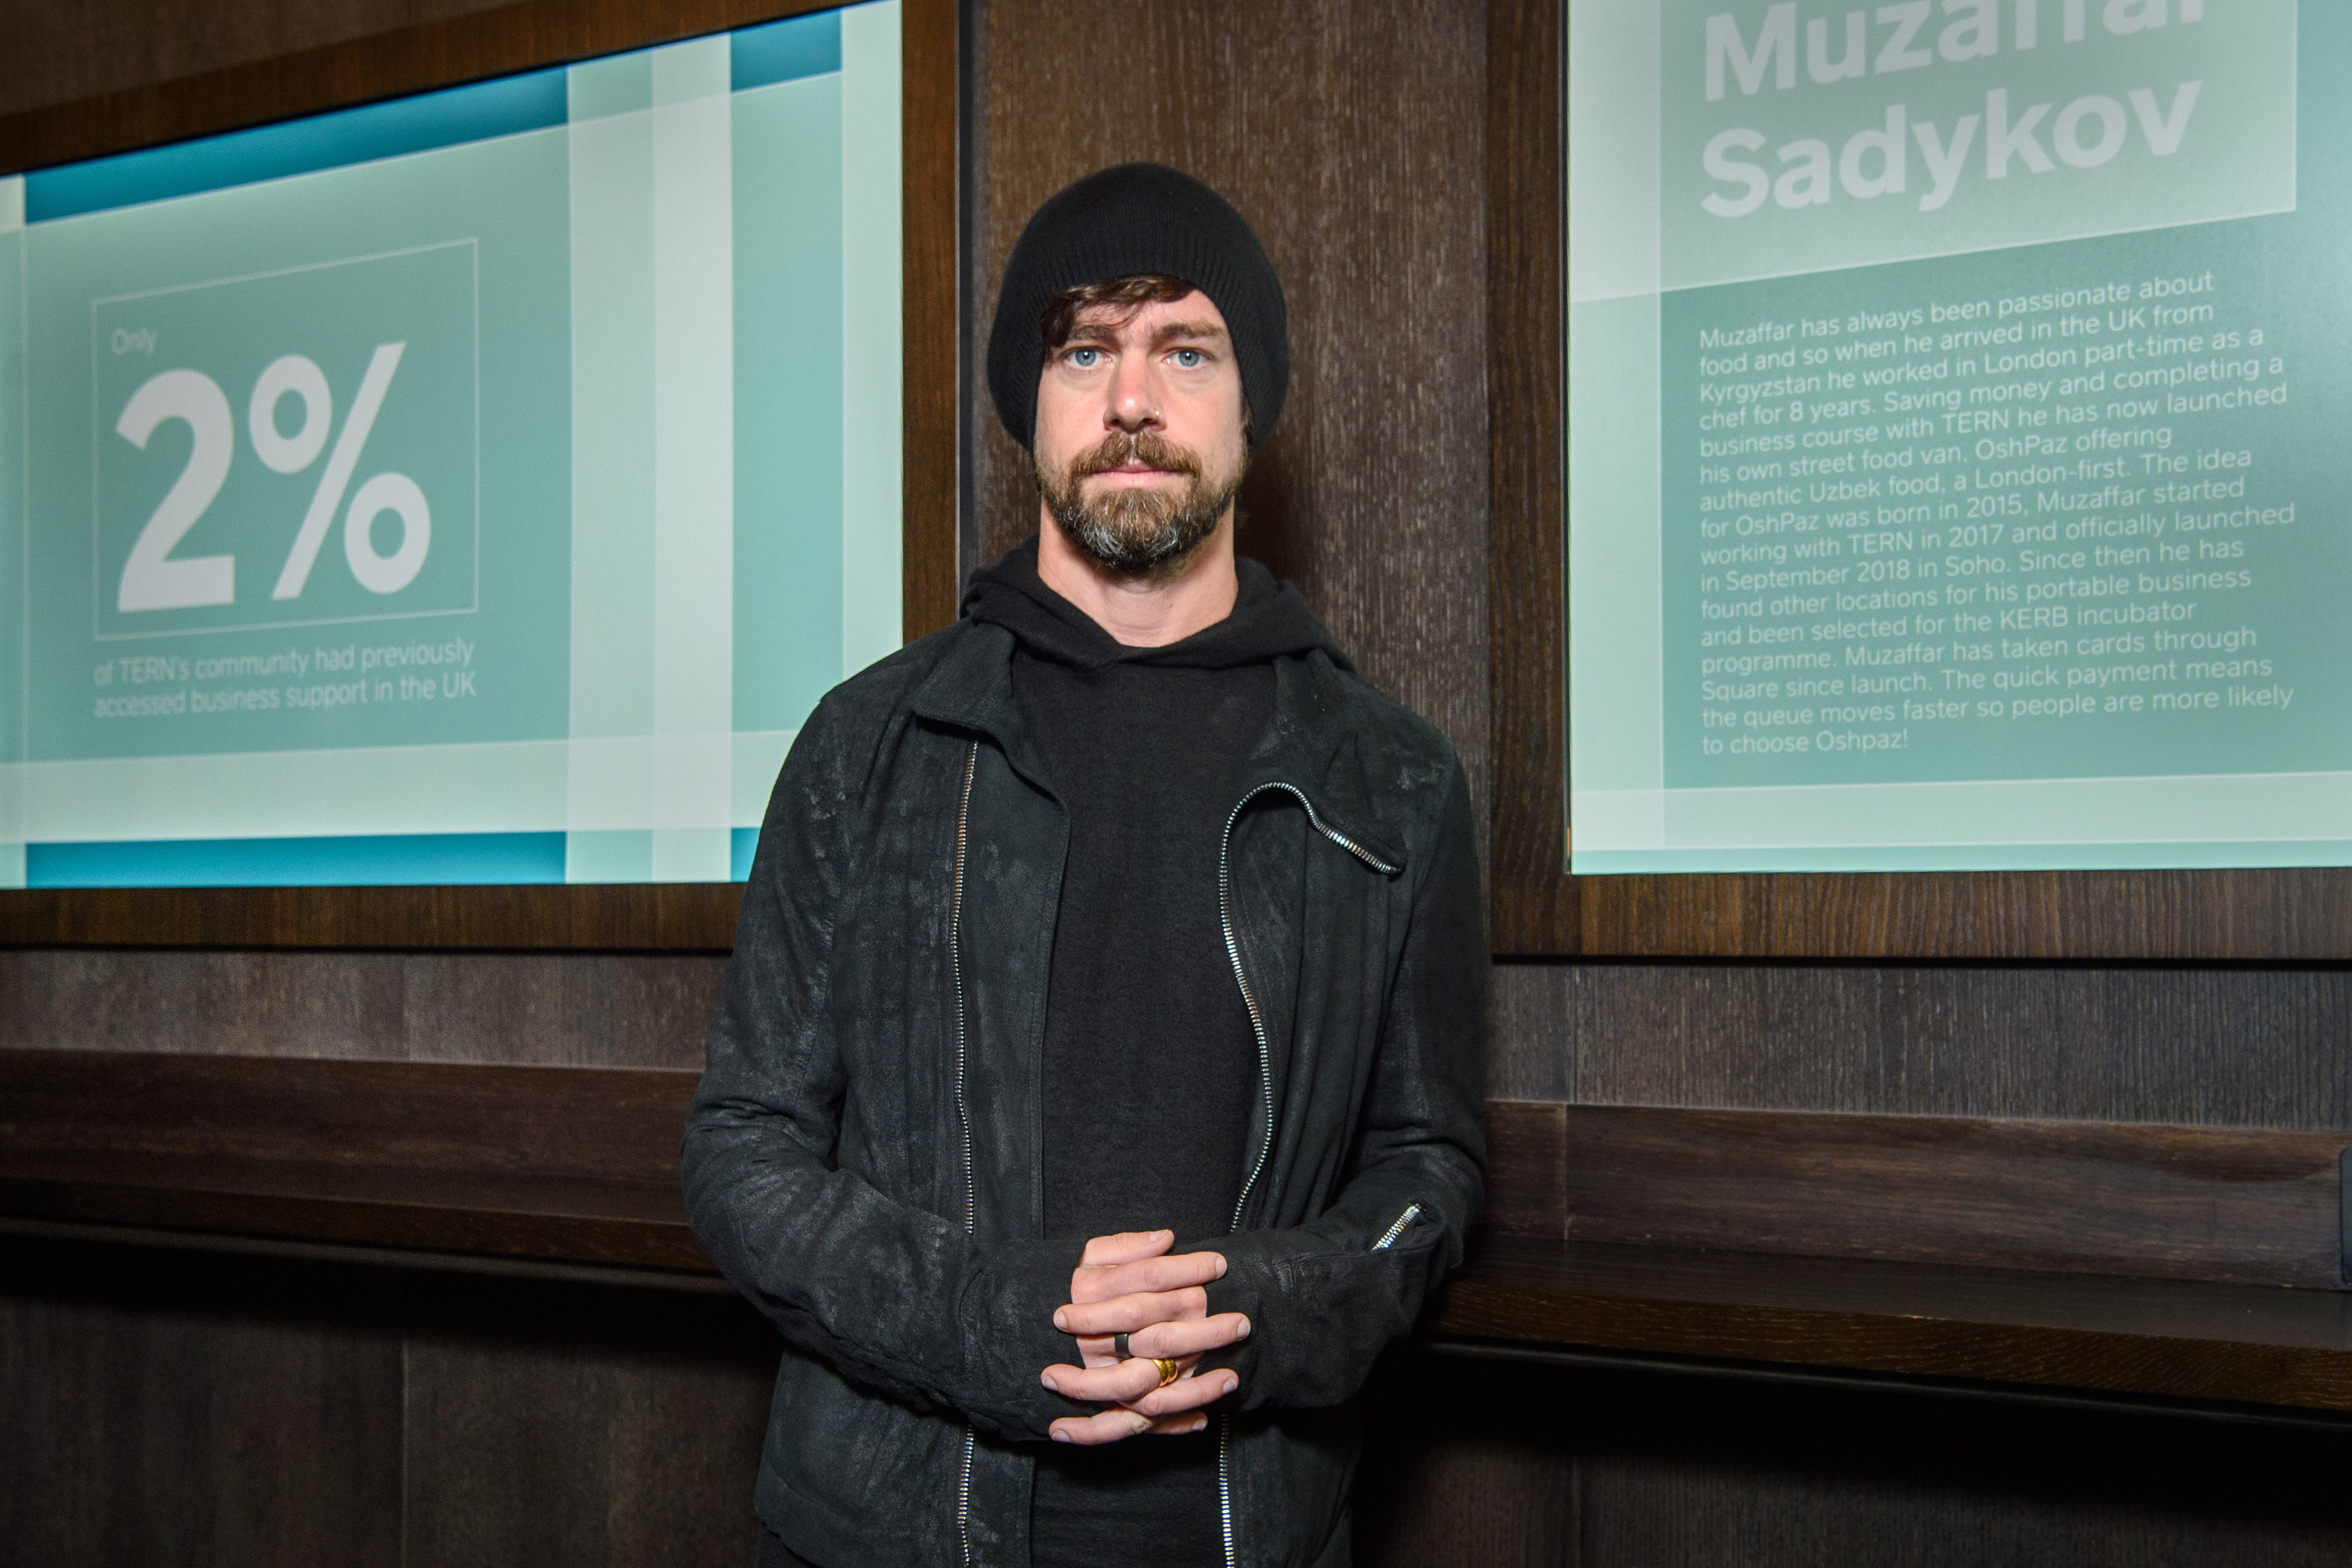 Jack Dorsey, standing in front of a screen, wearing all black and a black beanie